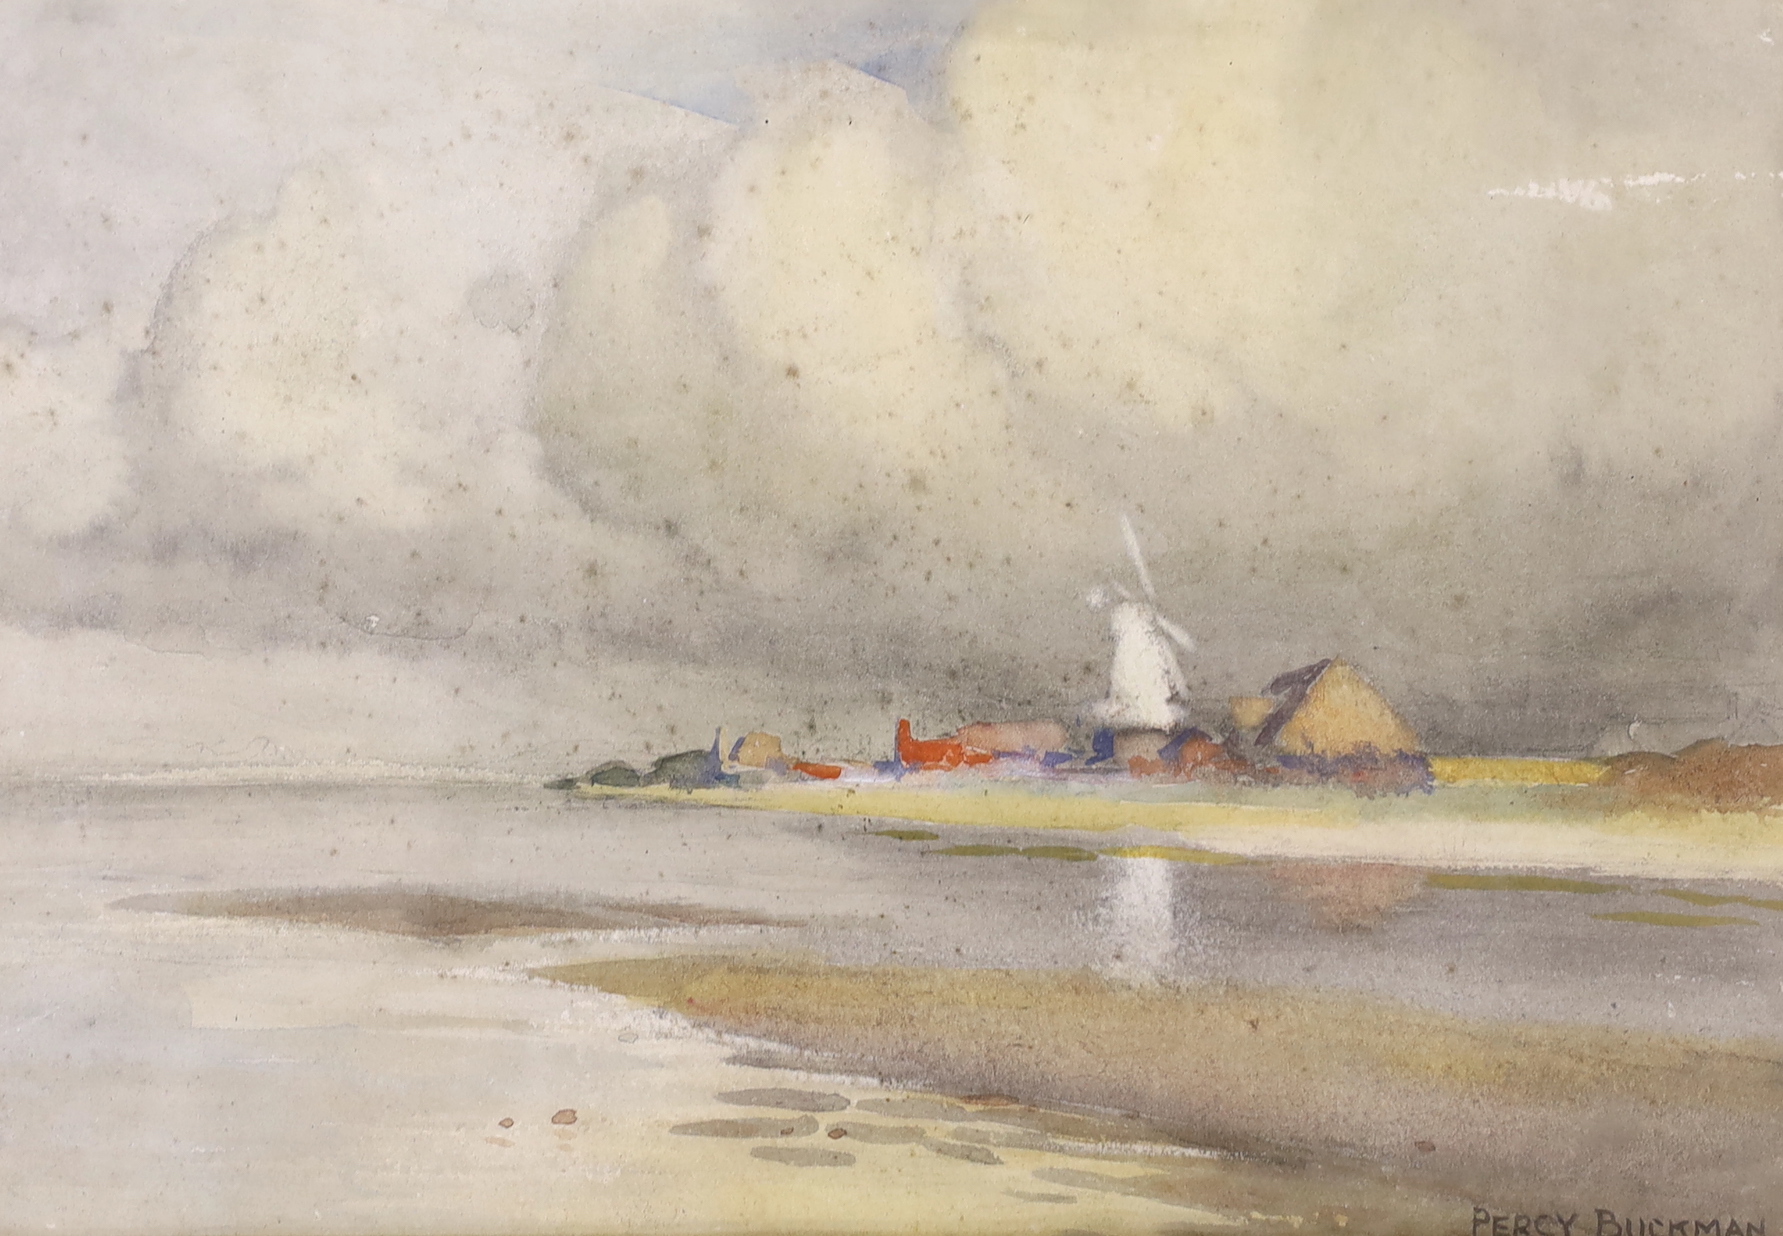 Percy Buckman RMS, (British 1865-1935), watercolour, Estuary with windmill, signed, 17 x 24cm